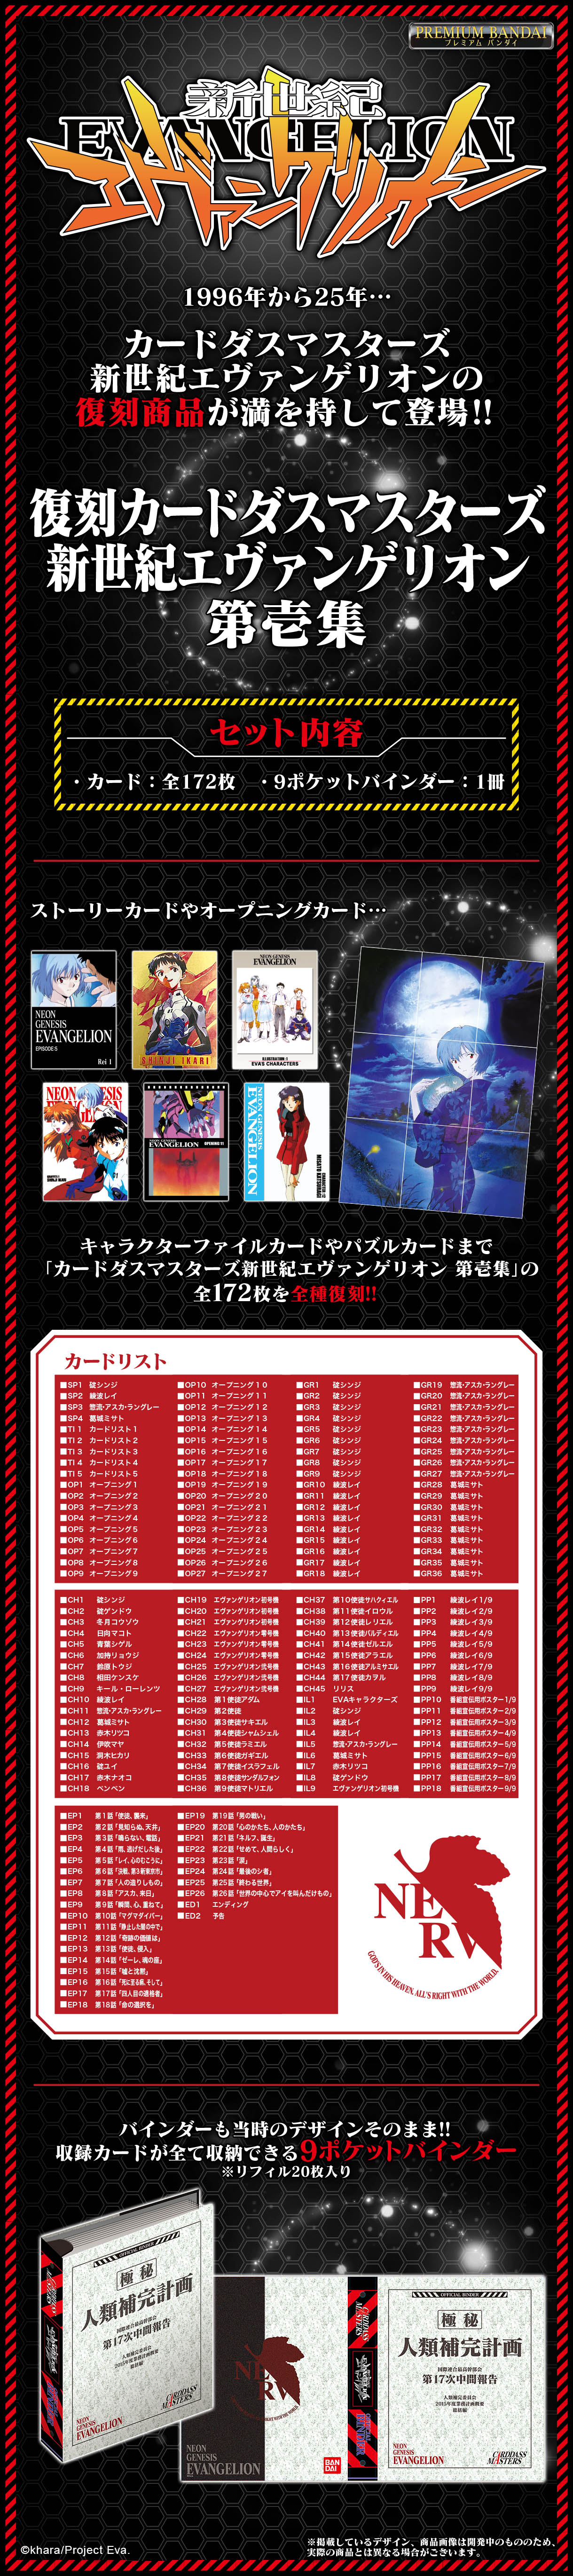 Evangelion CARDASS Masters Official 3 Ring Binder for sale online